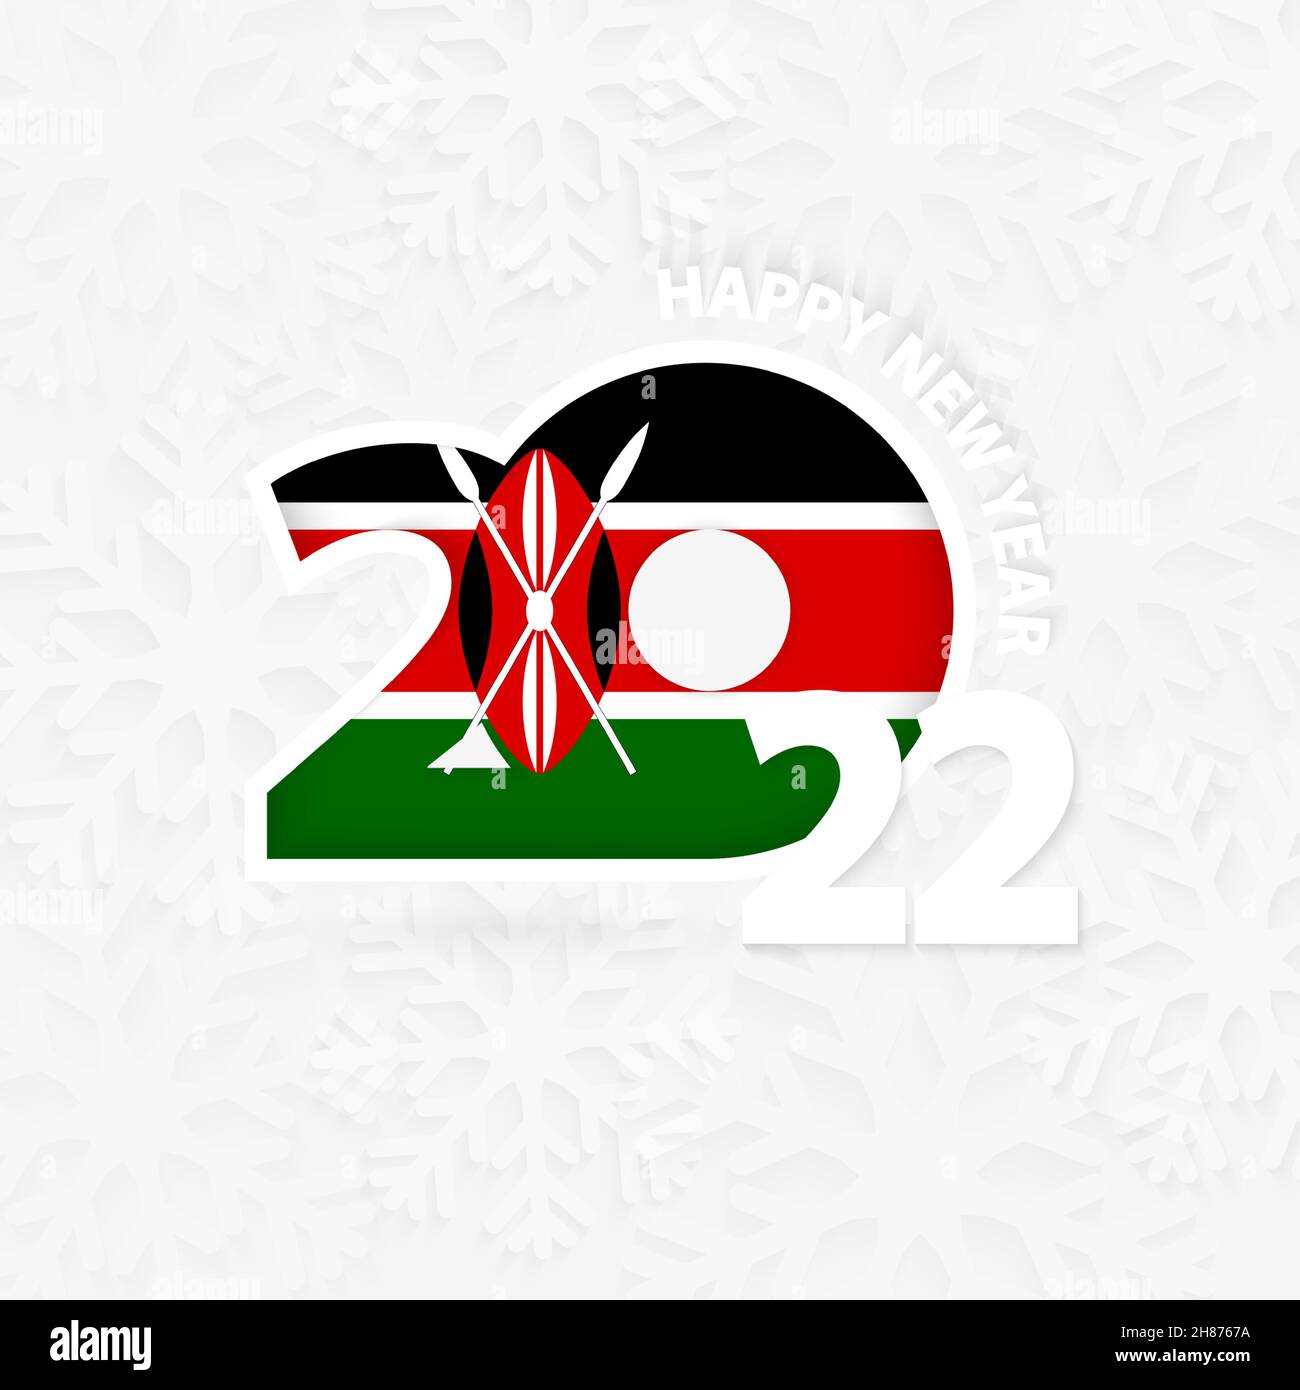 Happy New Year 2022 for Kenya on snowflake background. Greeting Kenya with new 2022 year. Stock Vector